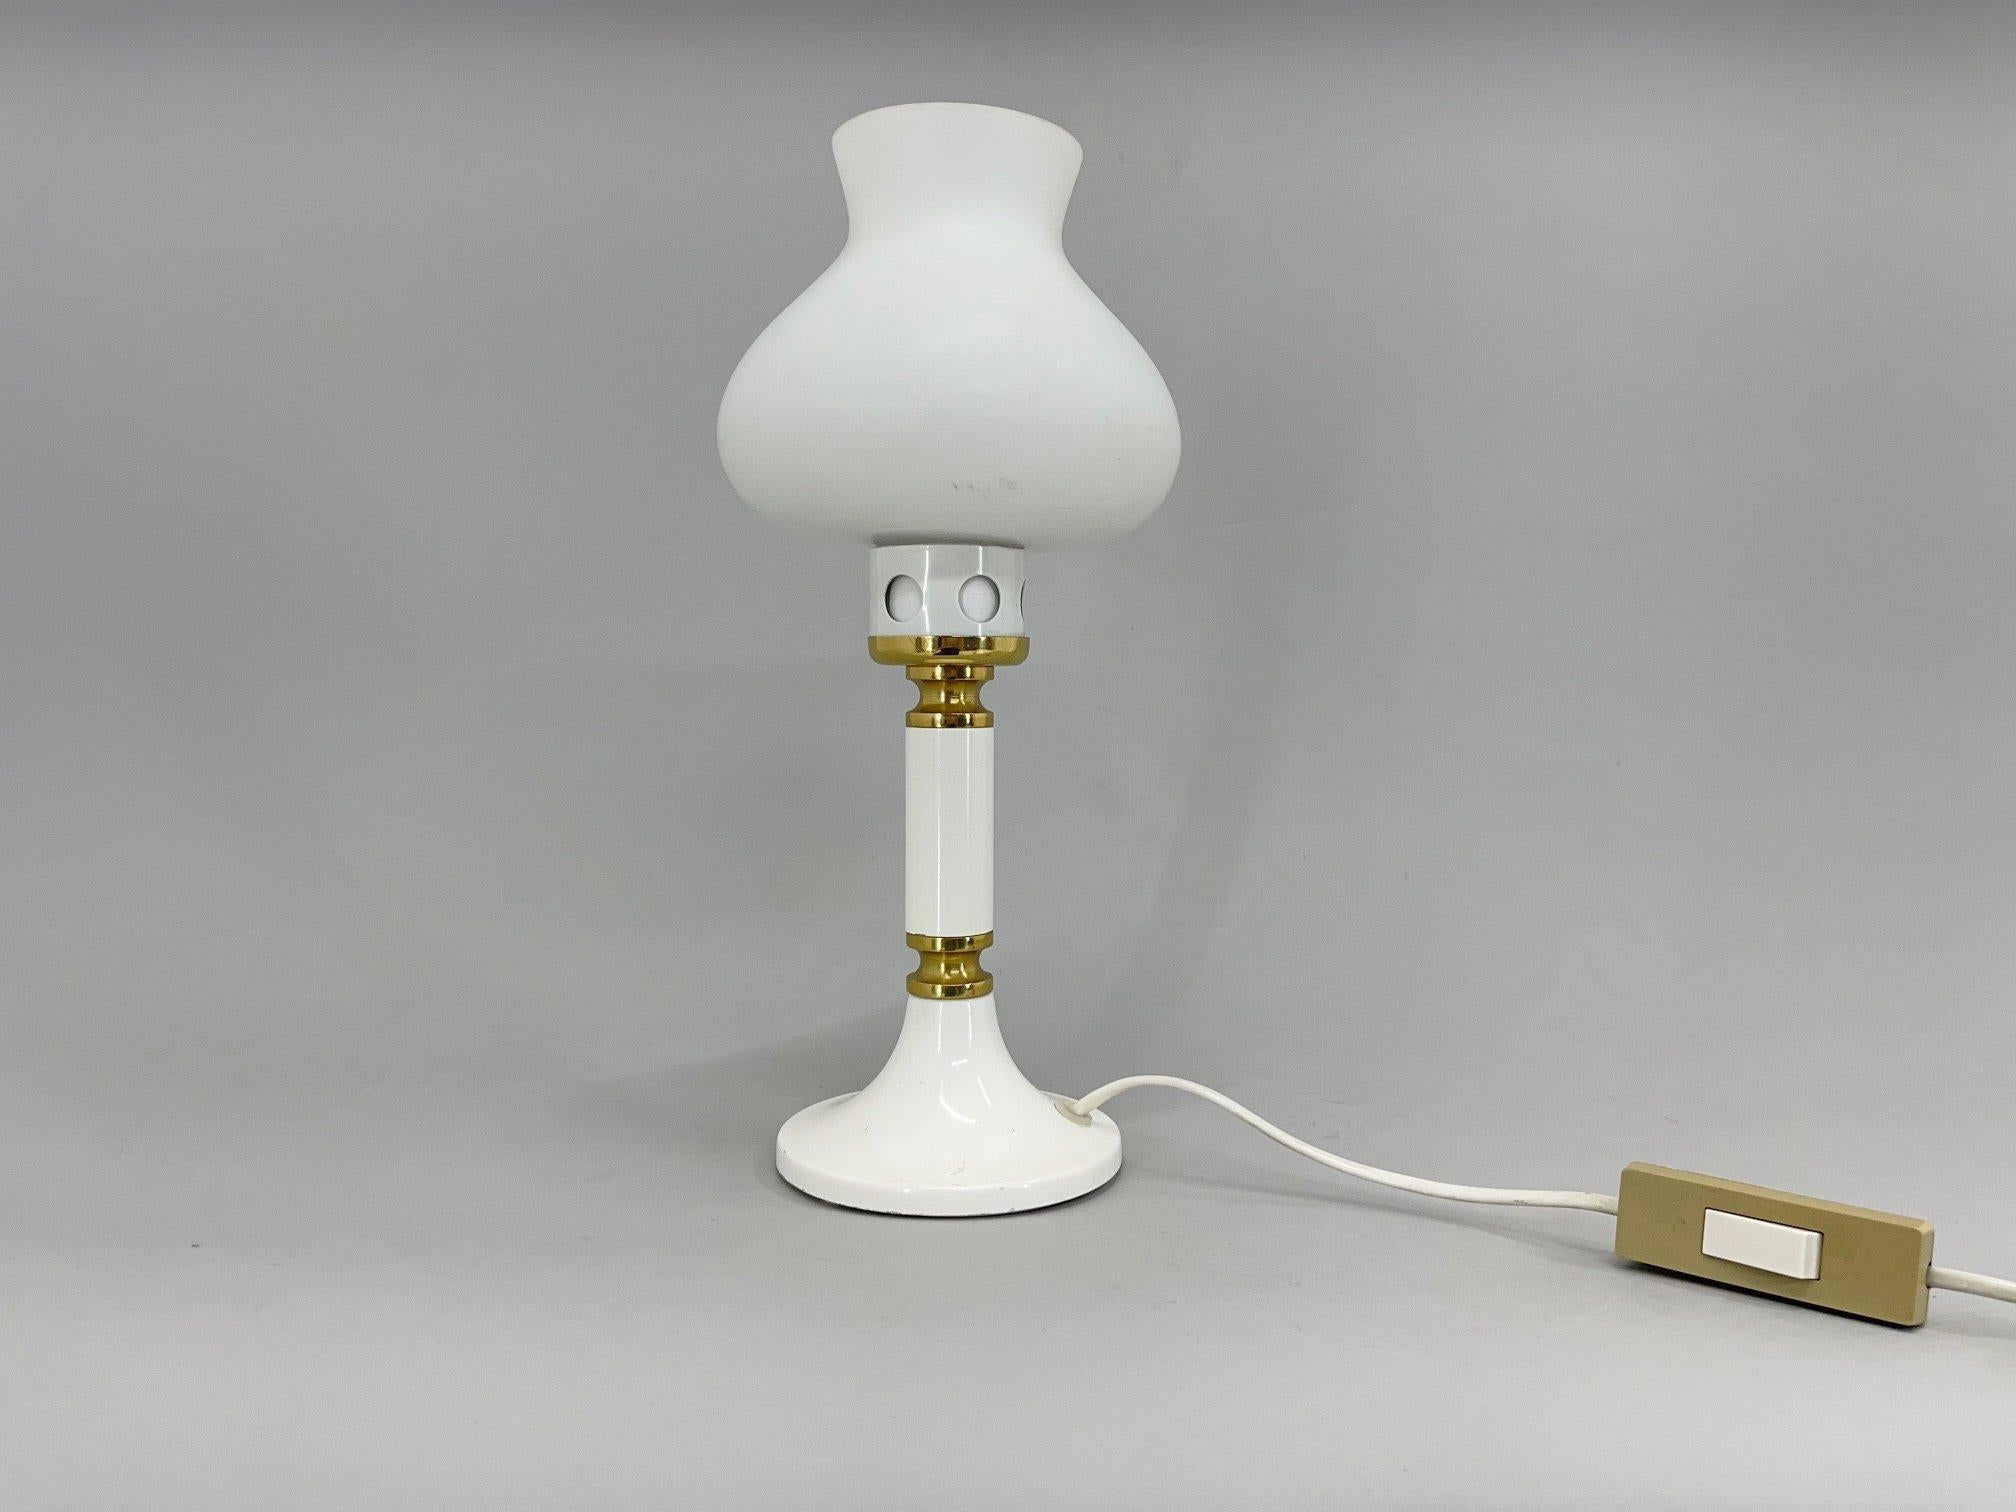 Vintage table lamp made in former Czechoslovakia by Drukov in the 1970's. 1 x 40W E12 - E14 bulb.